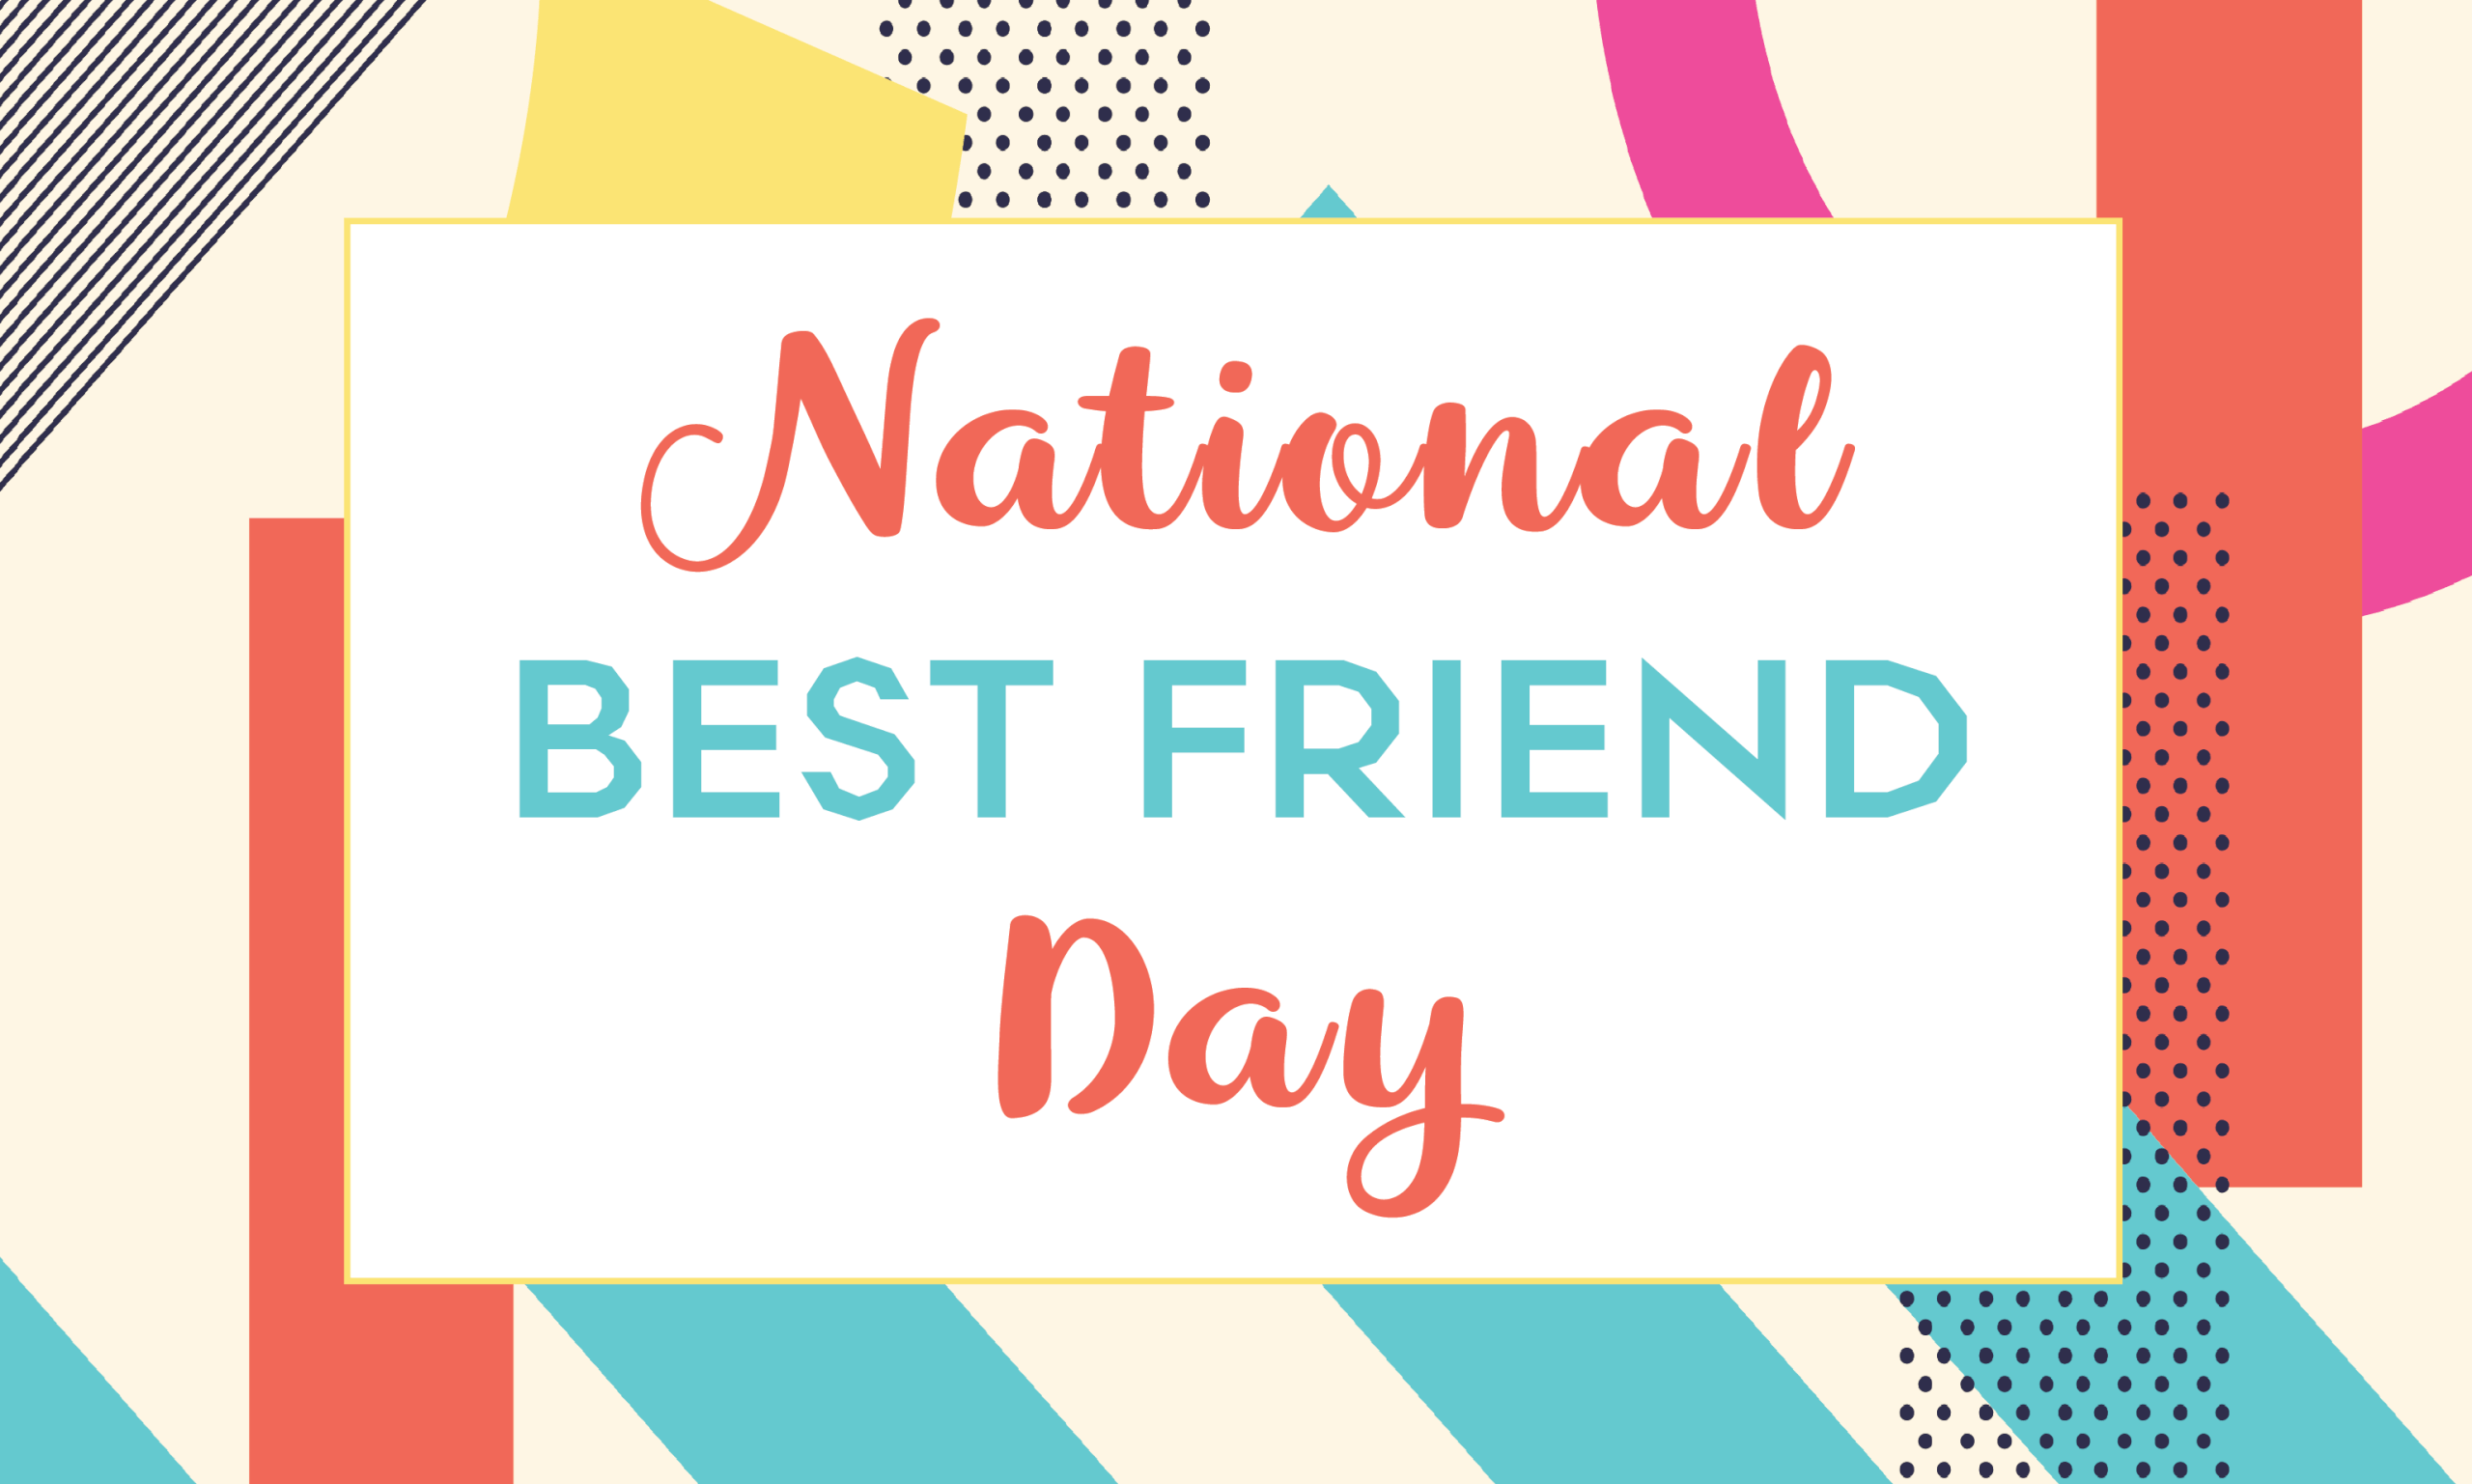 National Best Friend Day Event Image